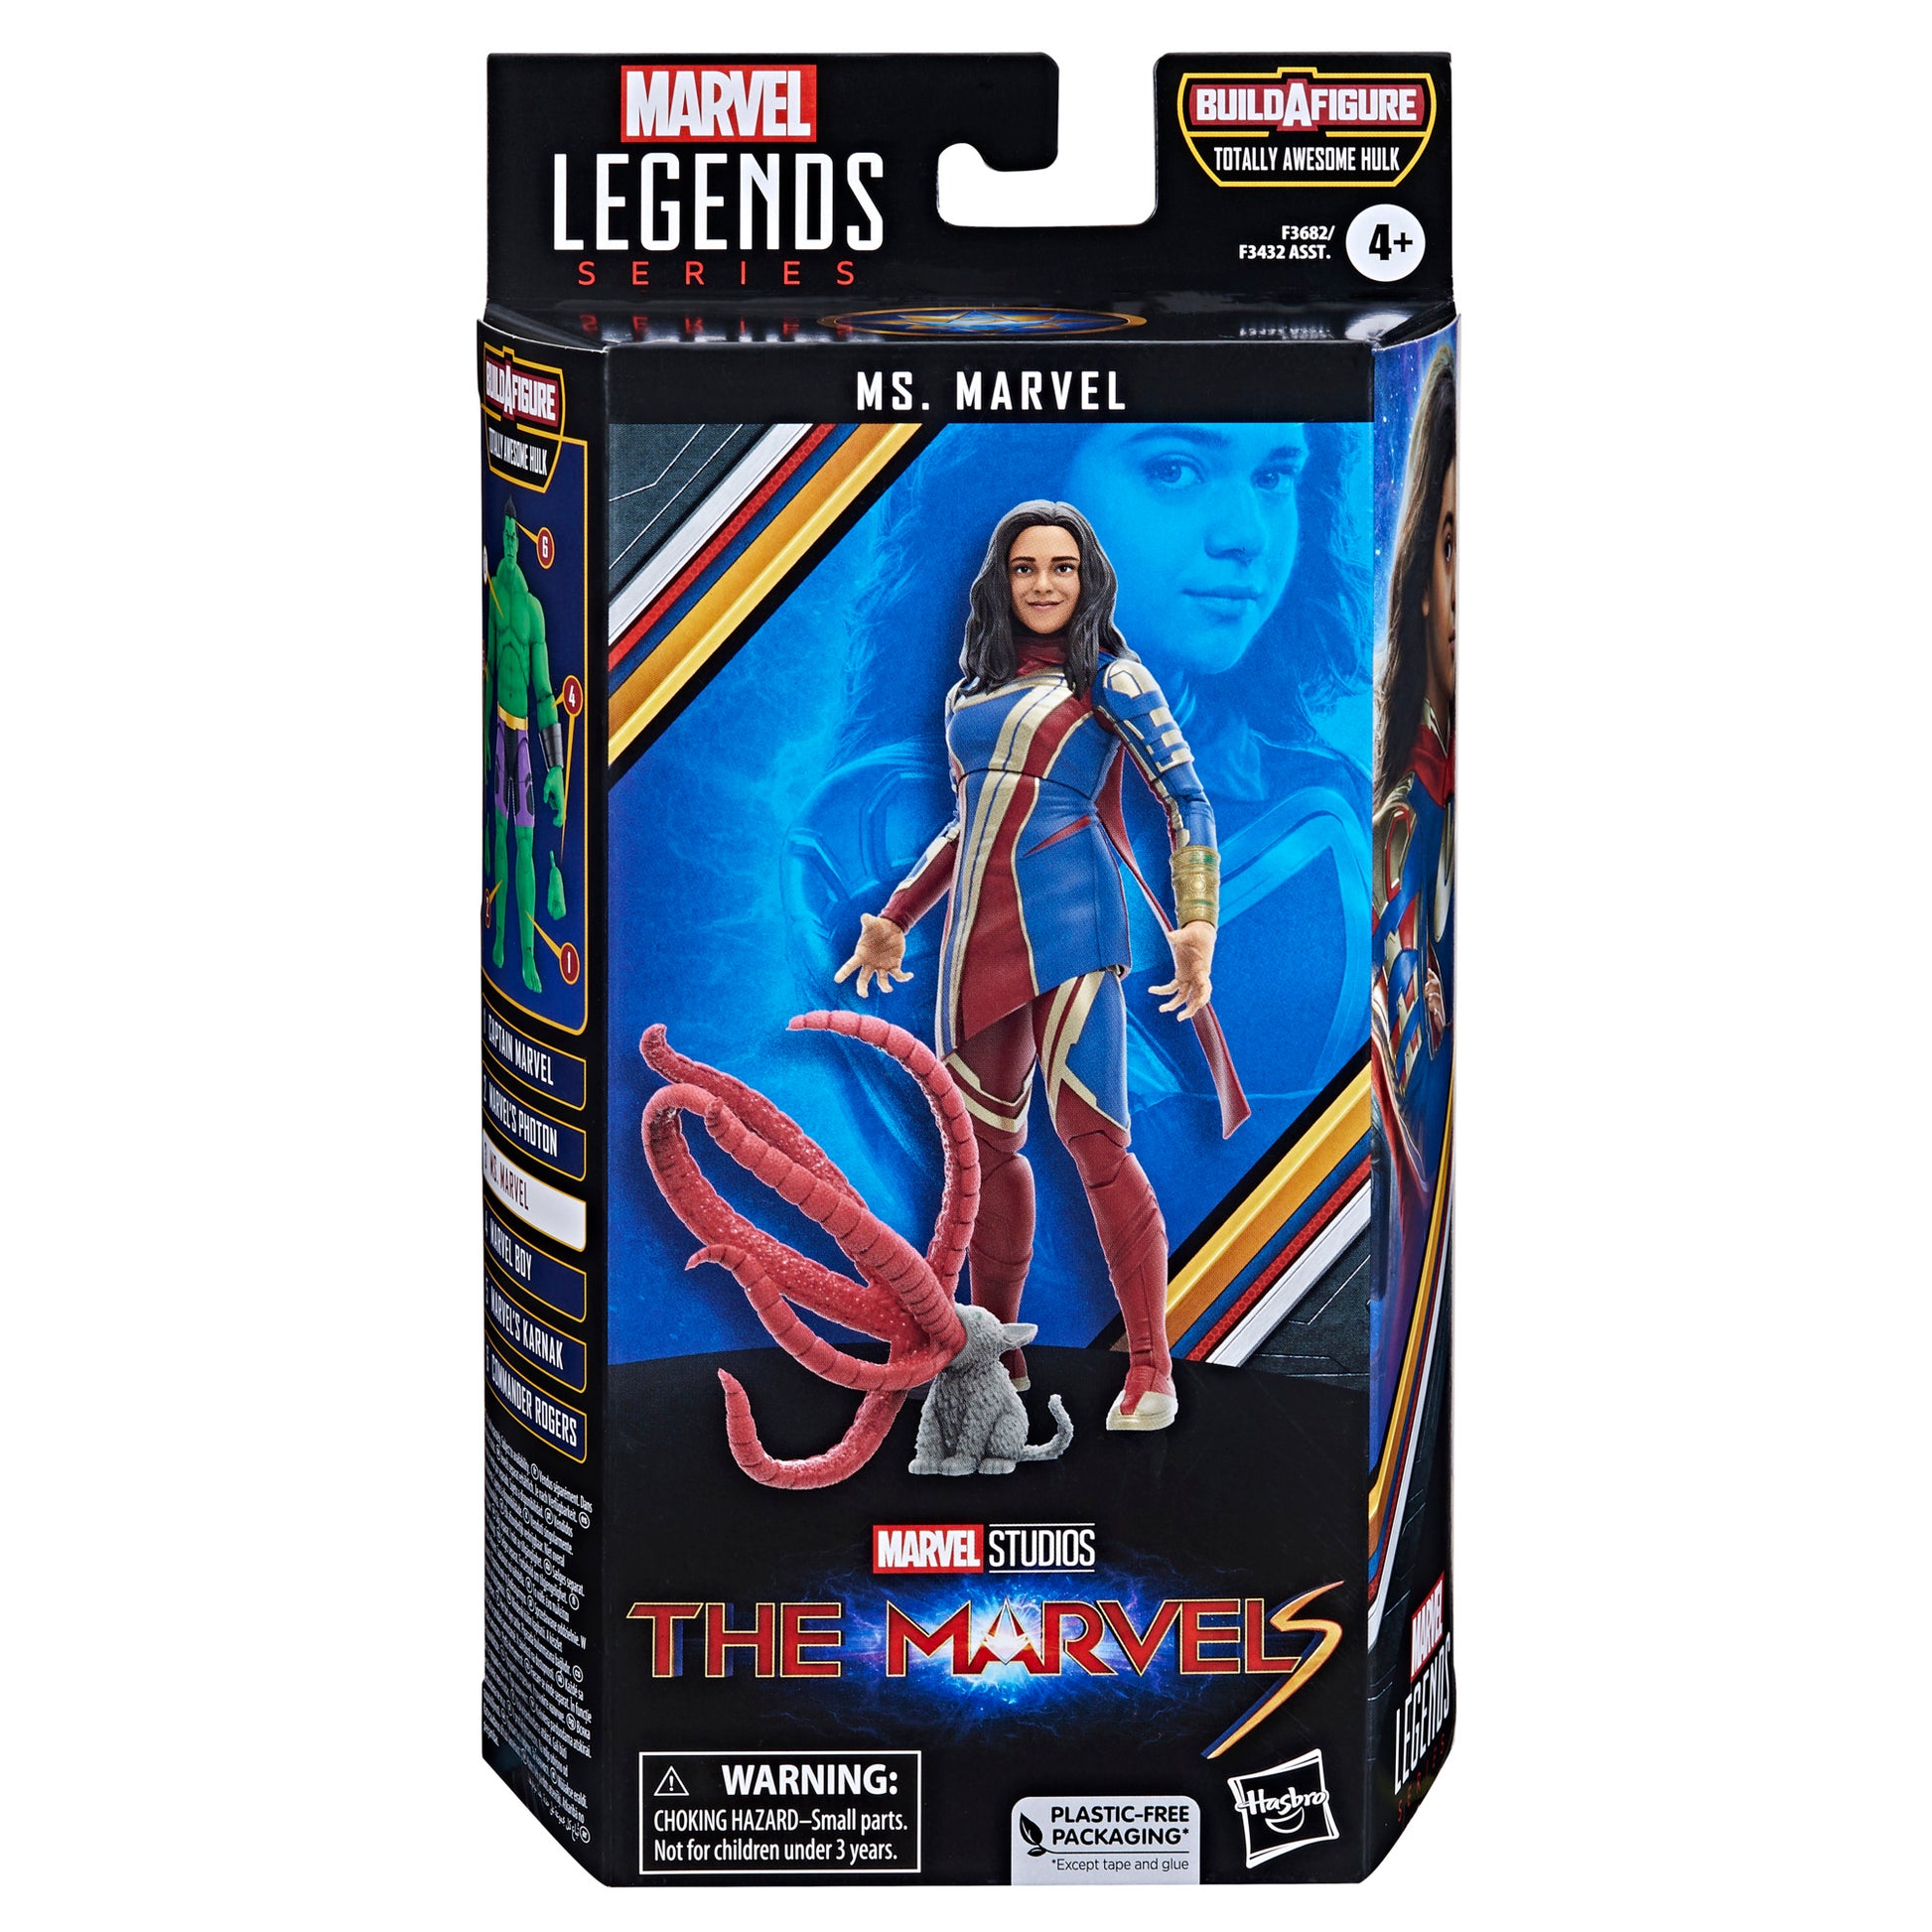 Ms. Marvel Action figure in a box front view - Heretoserveyou